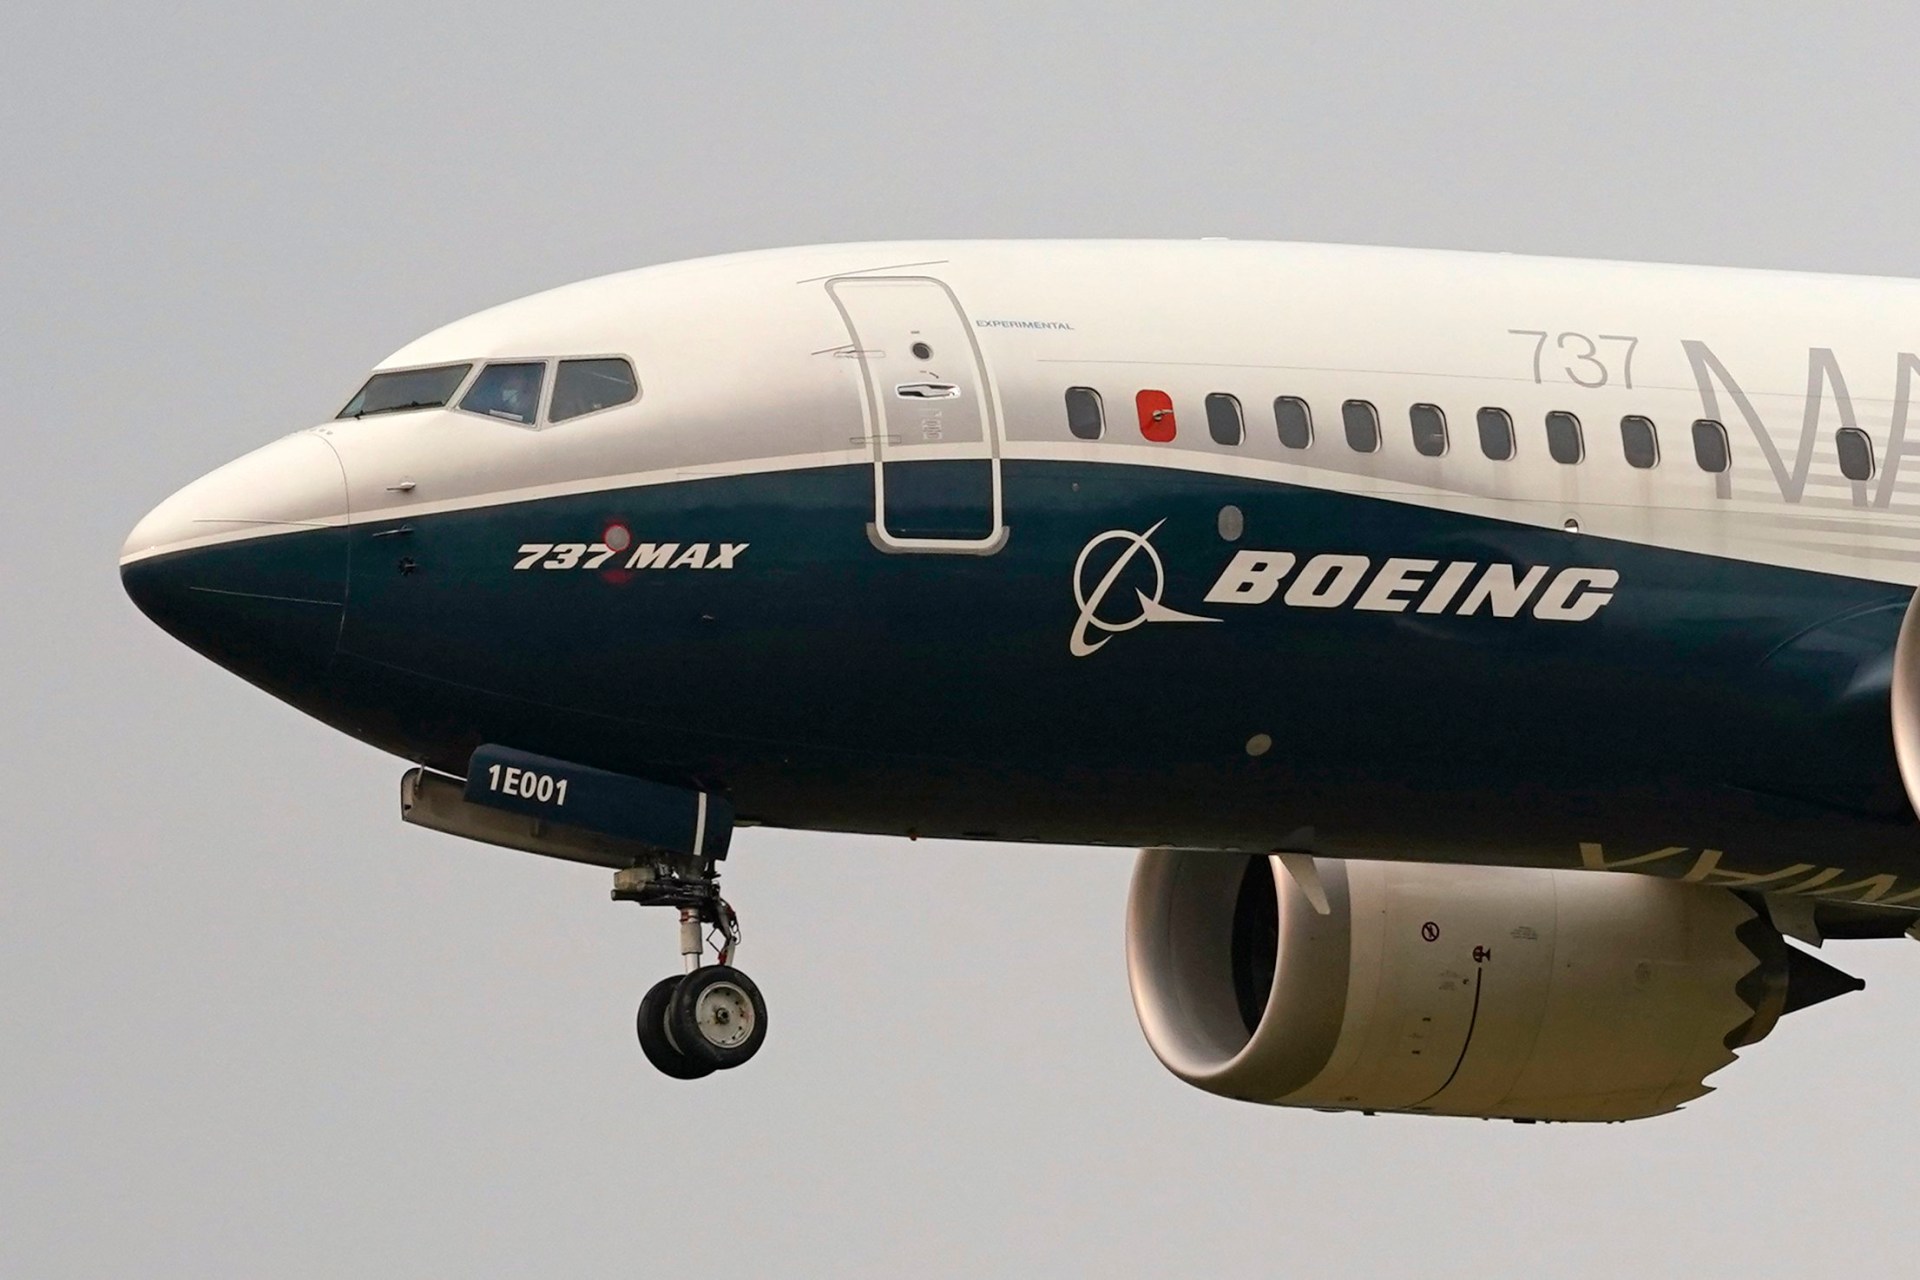 second boeing whistleblower dies suddenly after claiming safety flaws ignored